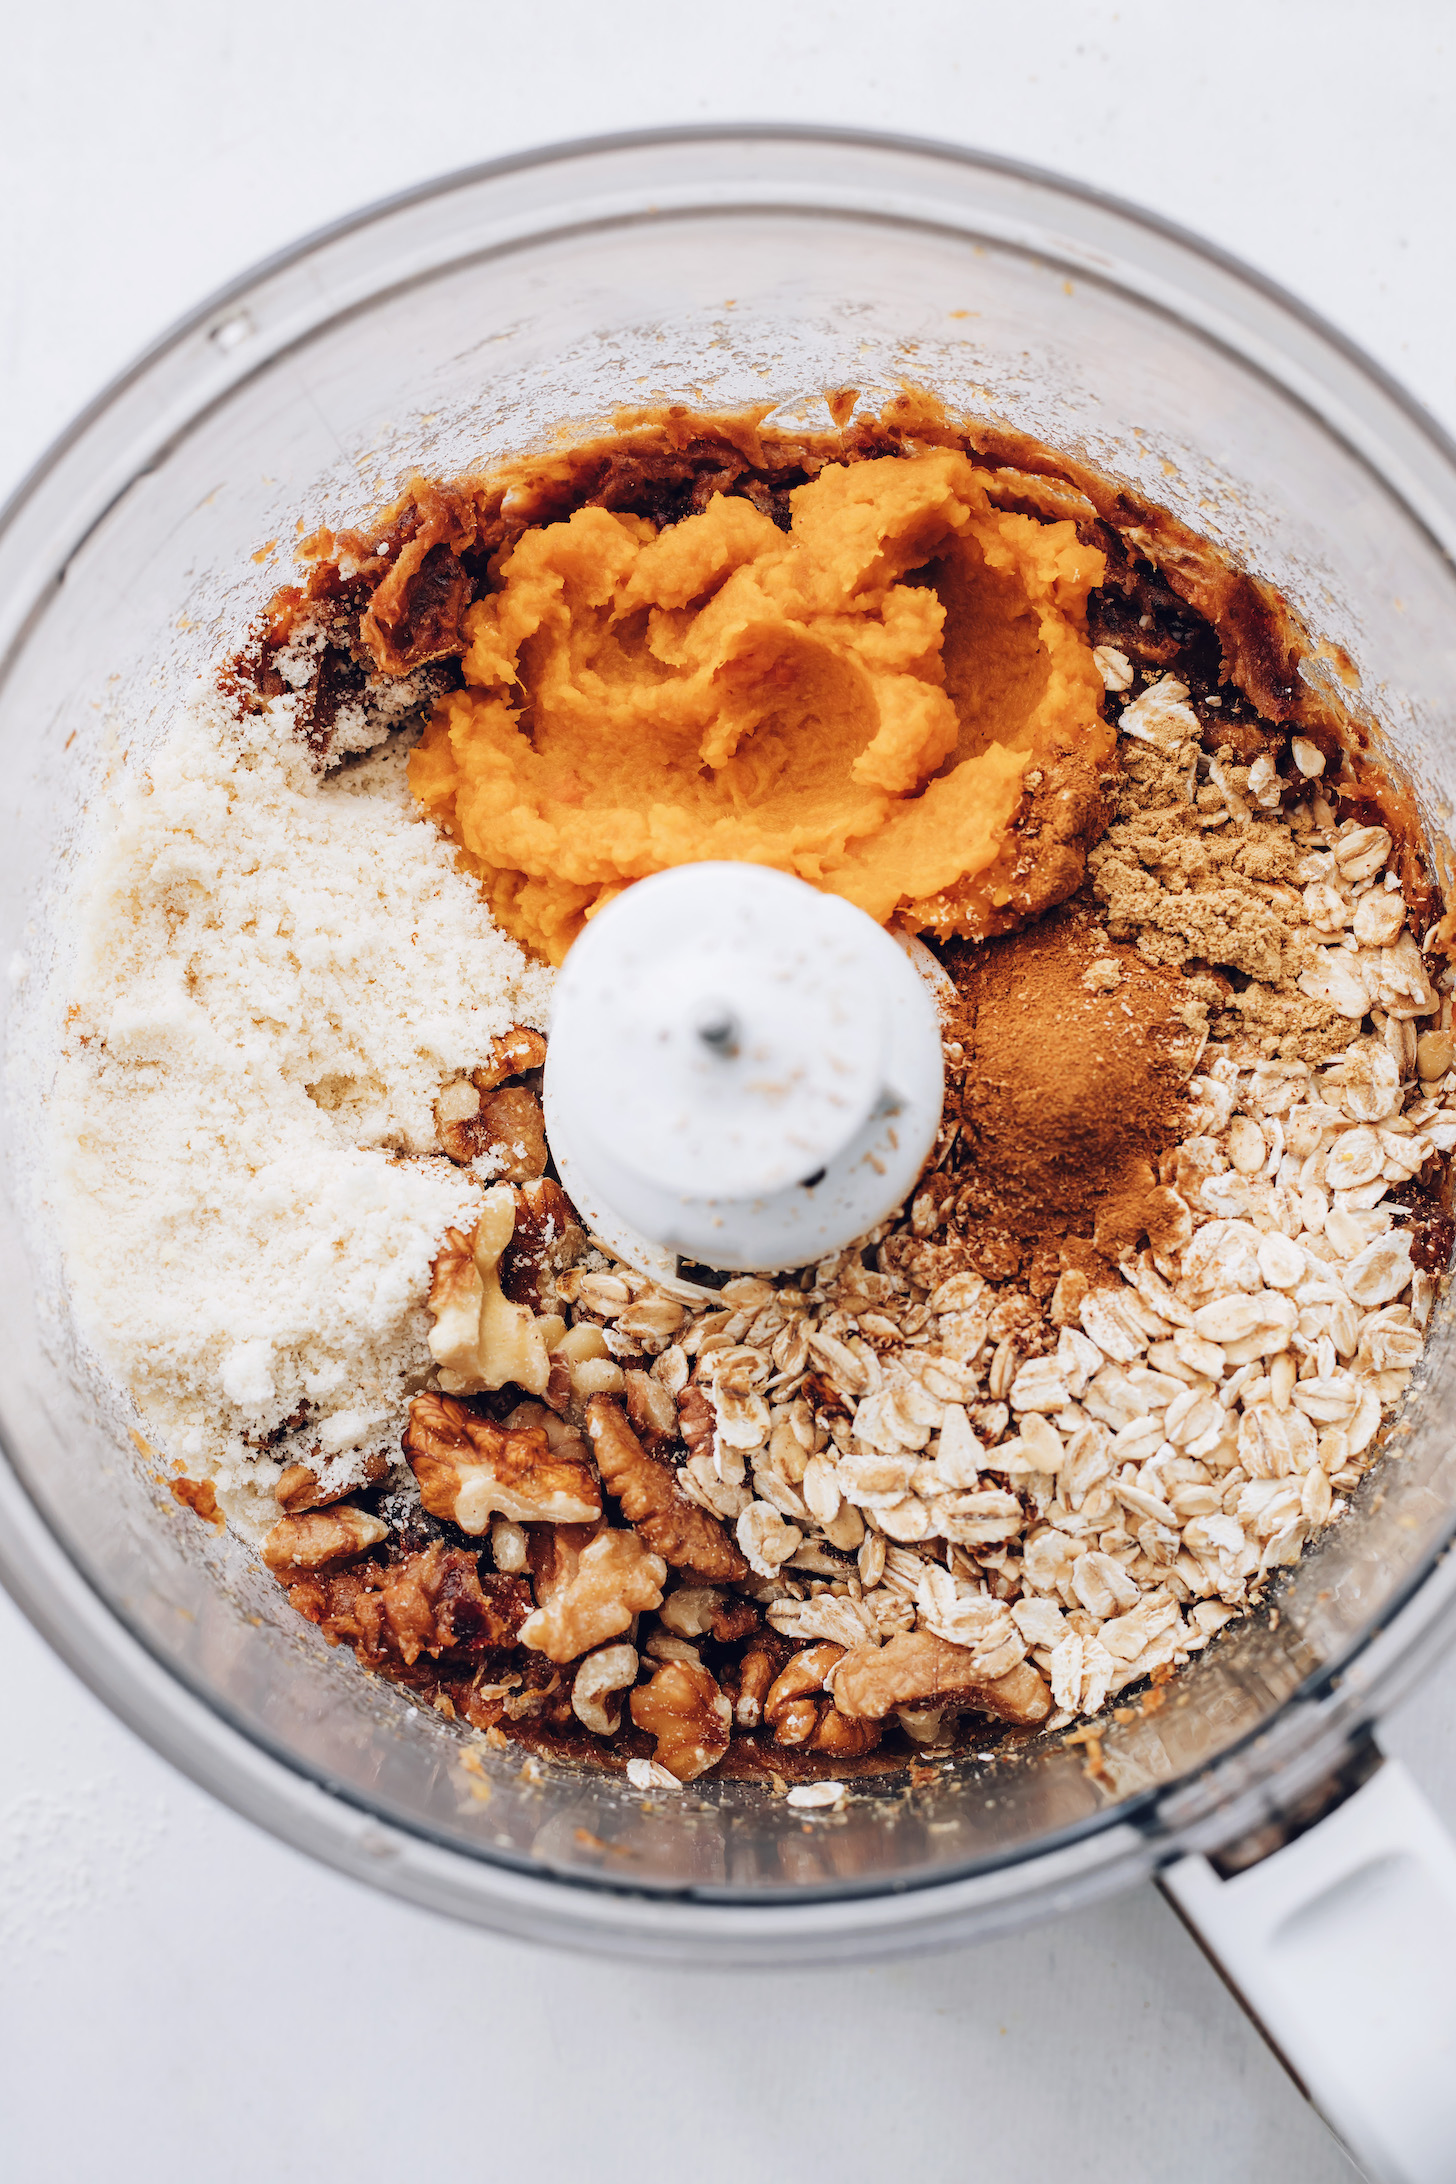 Food processor with date paste, almond flour, walnuts, oats, spices, and pumpkin purée